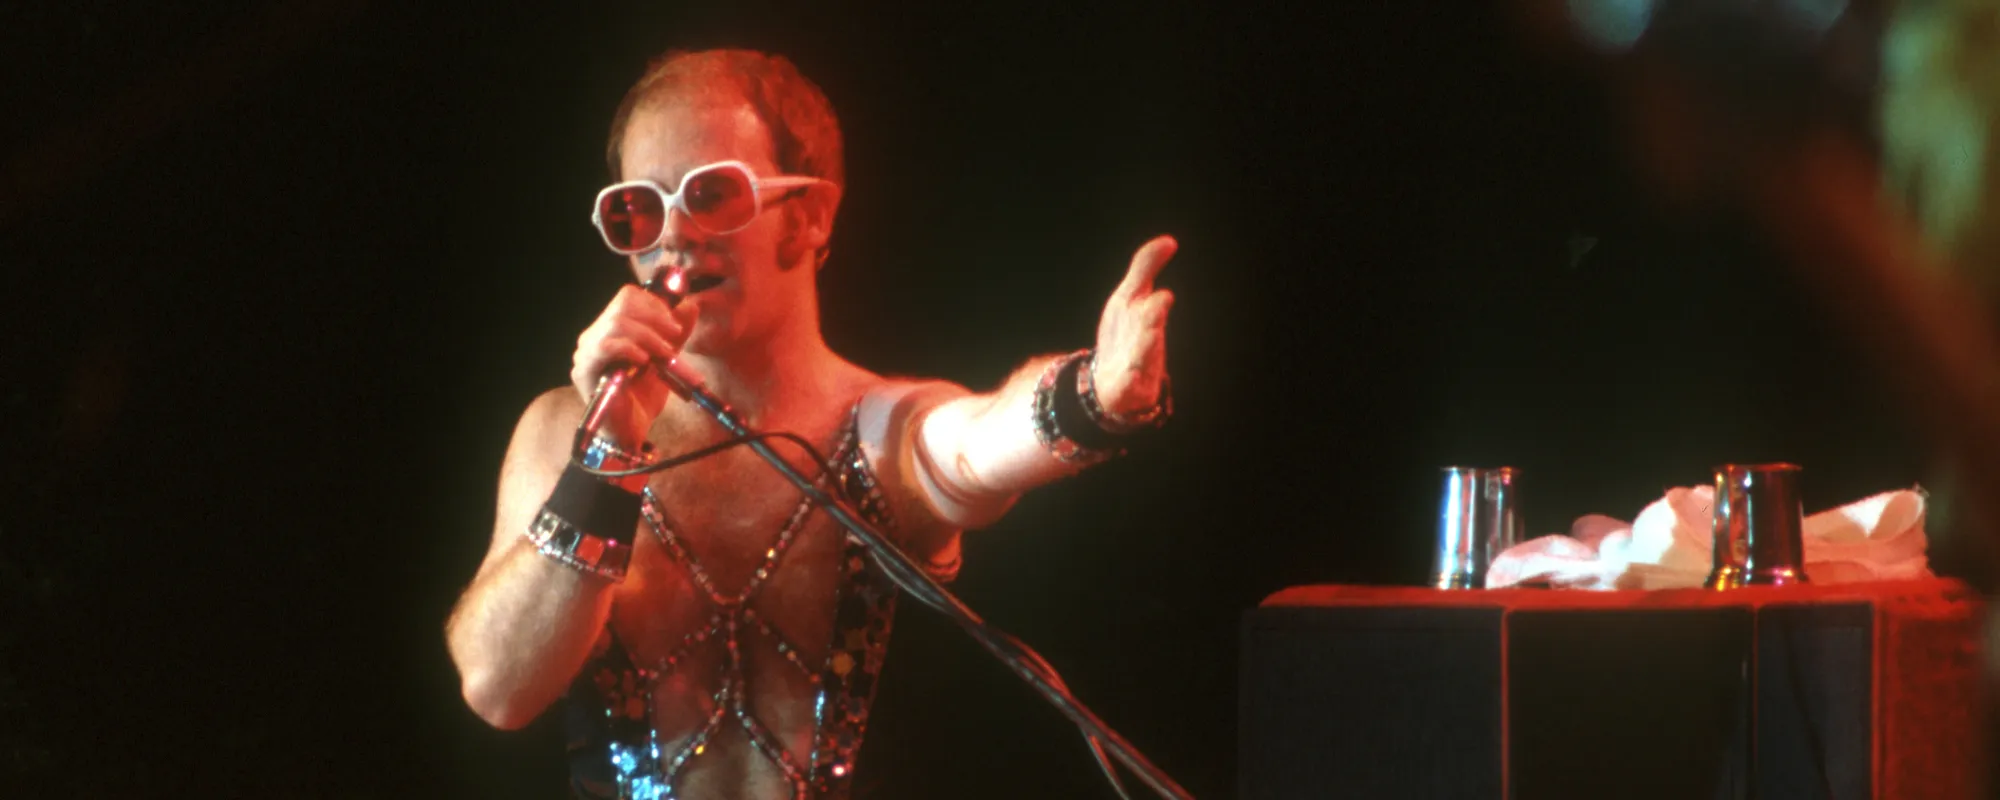 The Meaning Behind “Bennie and the Jets” by Elton John and Its Sci-Fi Origins